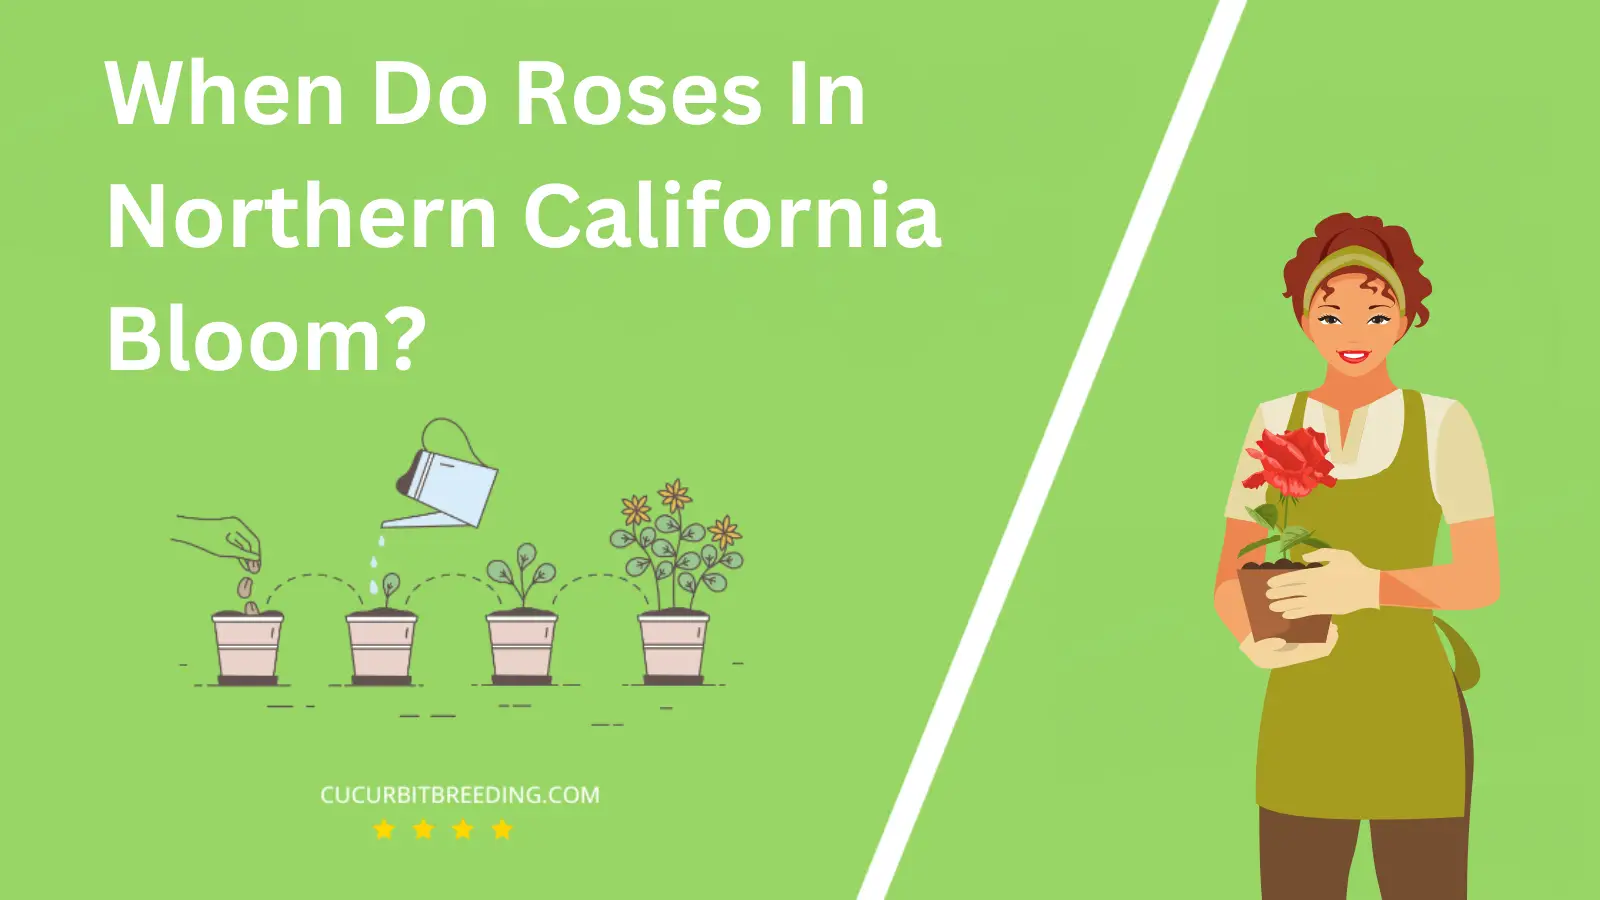 When Do Roses In Northern California Bloom?